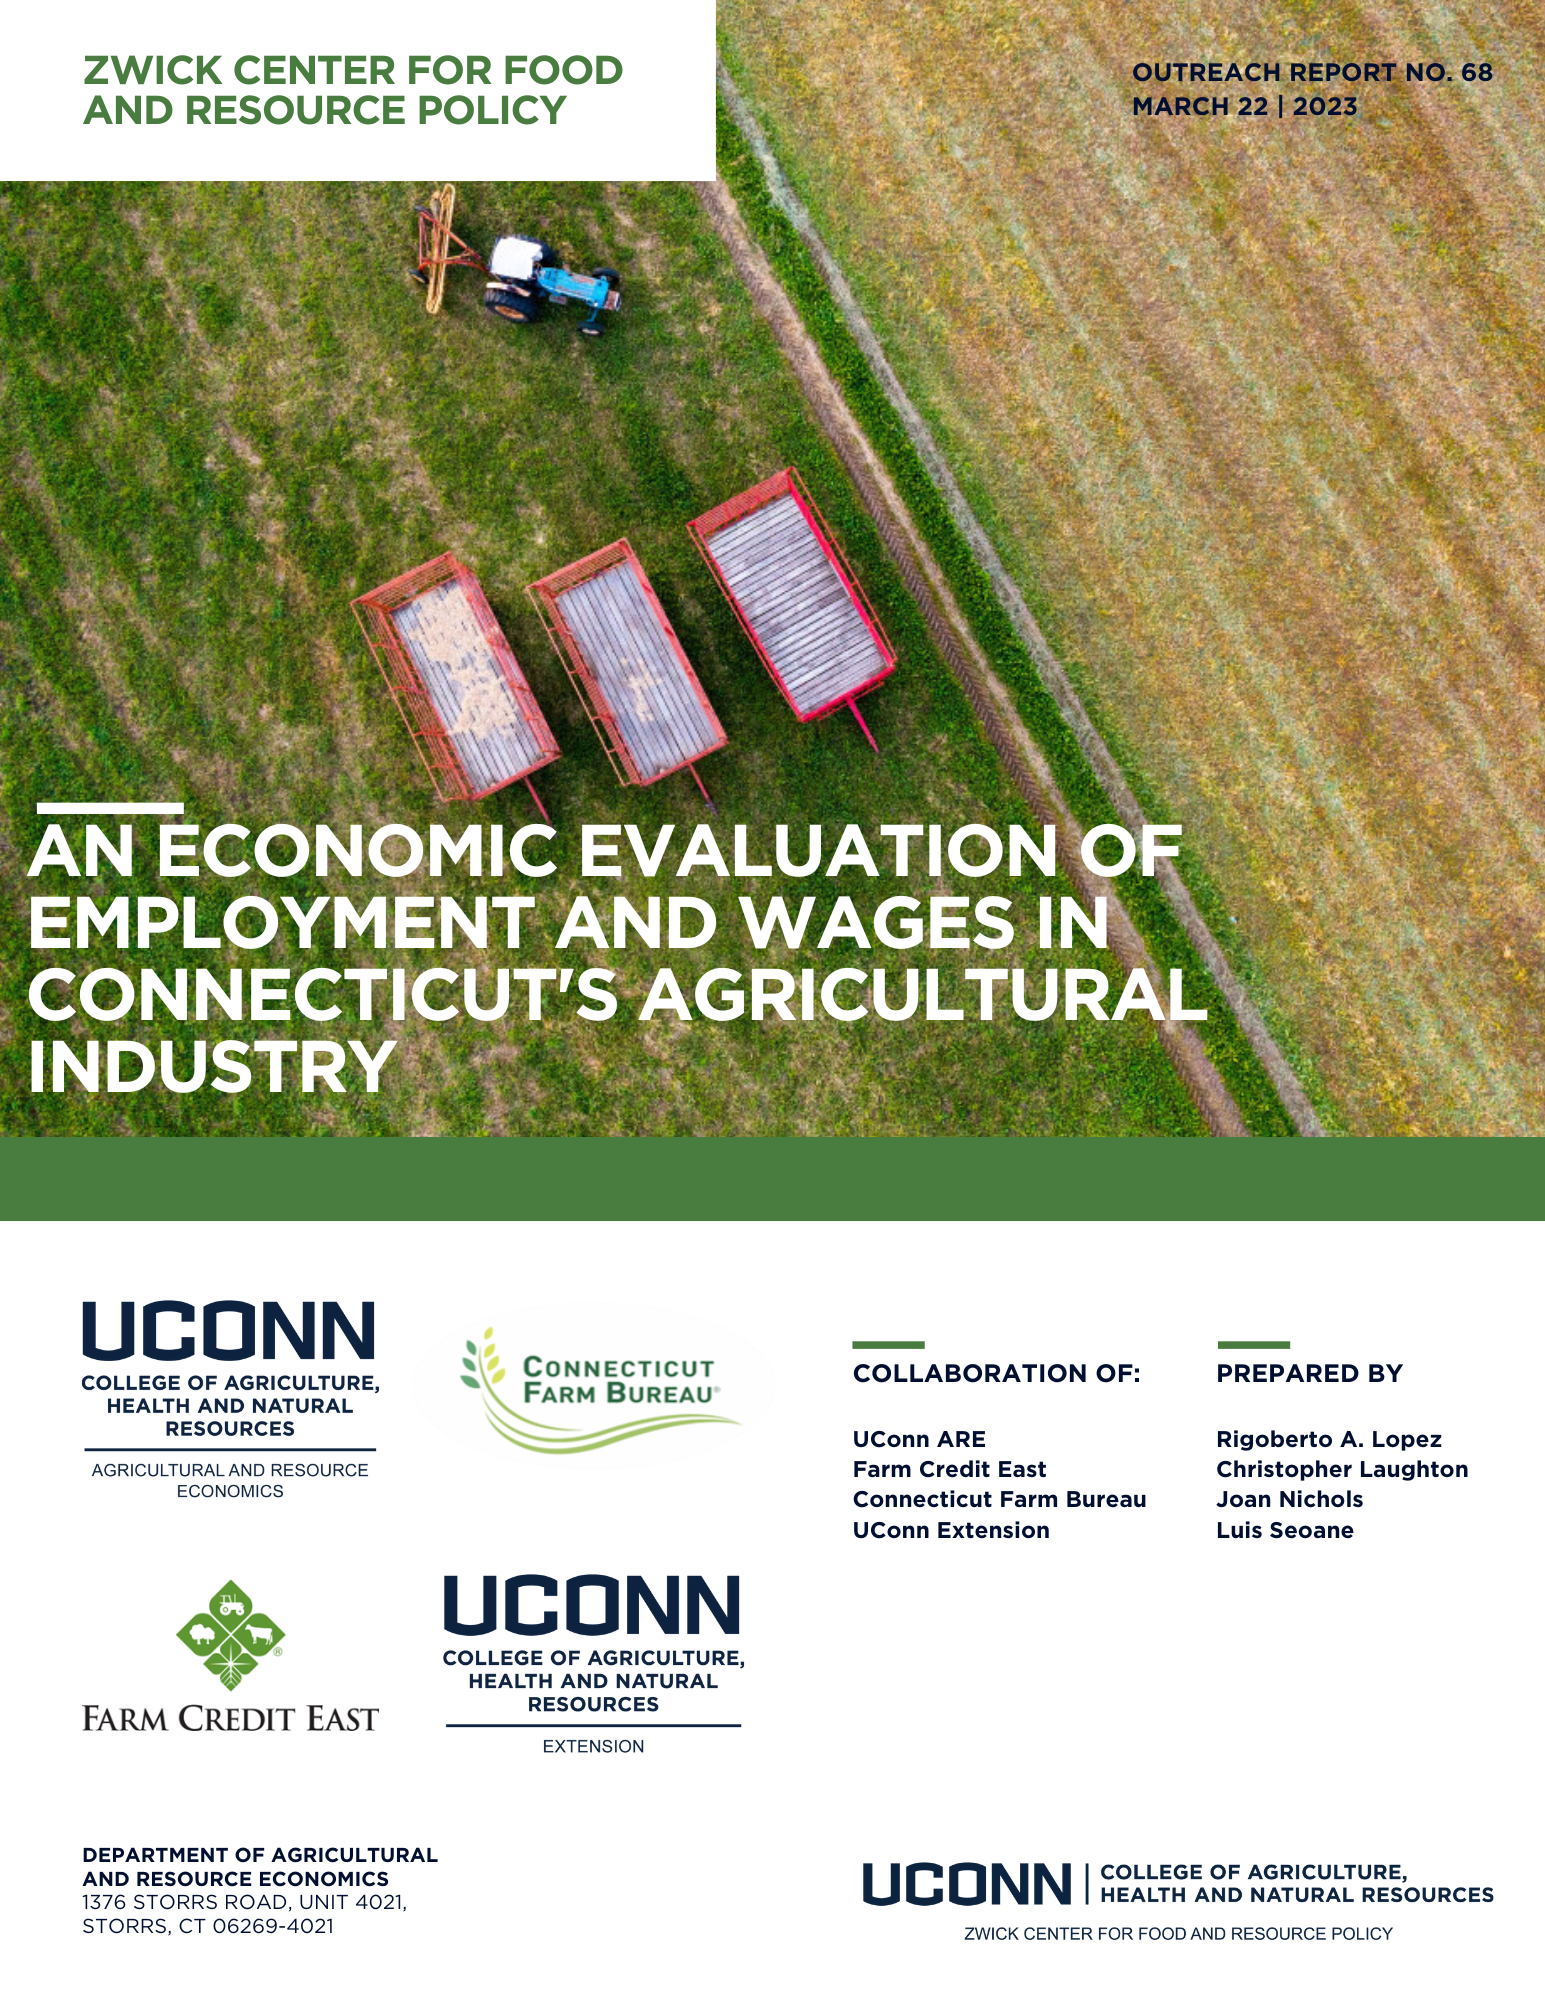 Cover and link to report "An Economic Evaluation of Employment and Wages in Connecticut's Agricultural Industry" 